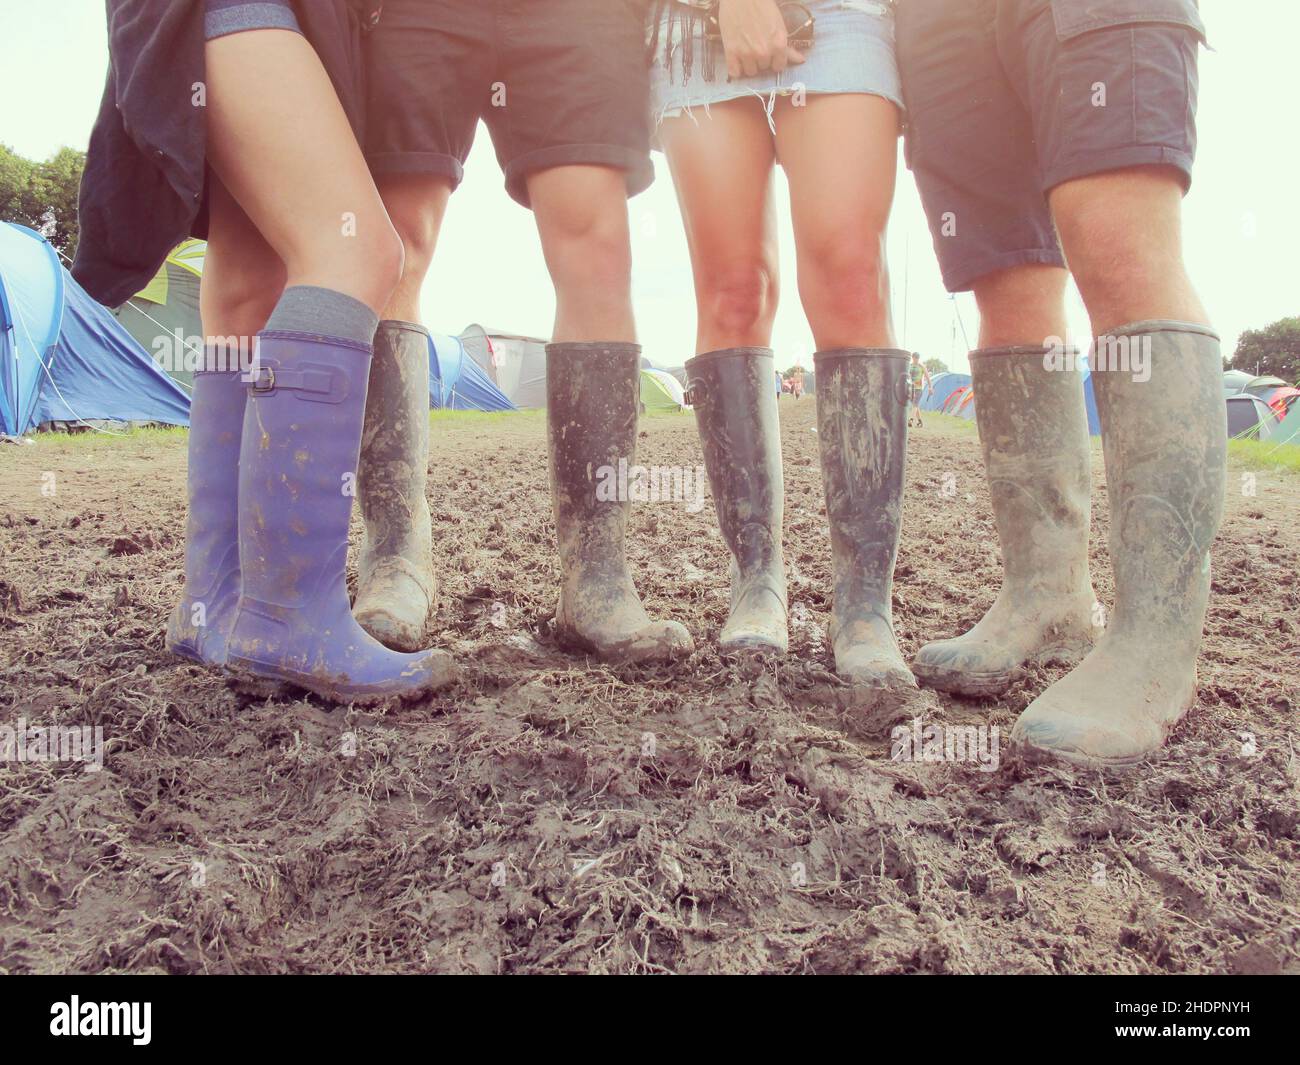 mud, galoshes, festival goer, muds, wellies, wellington boots, welly Stock Photo